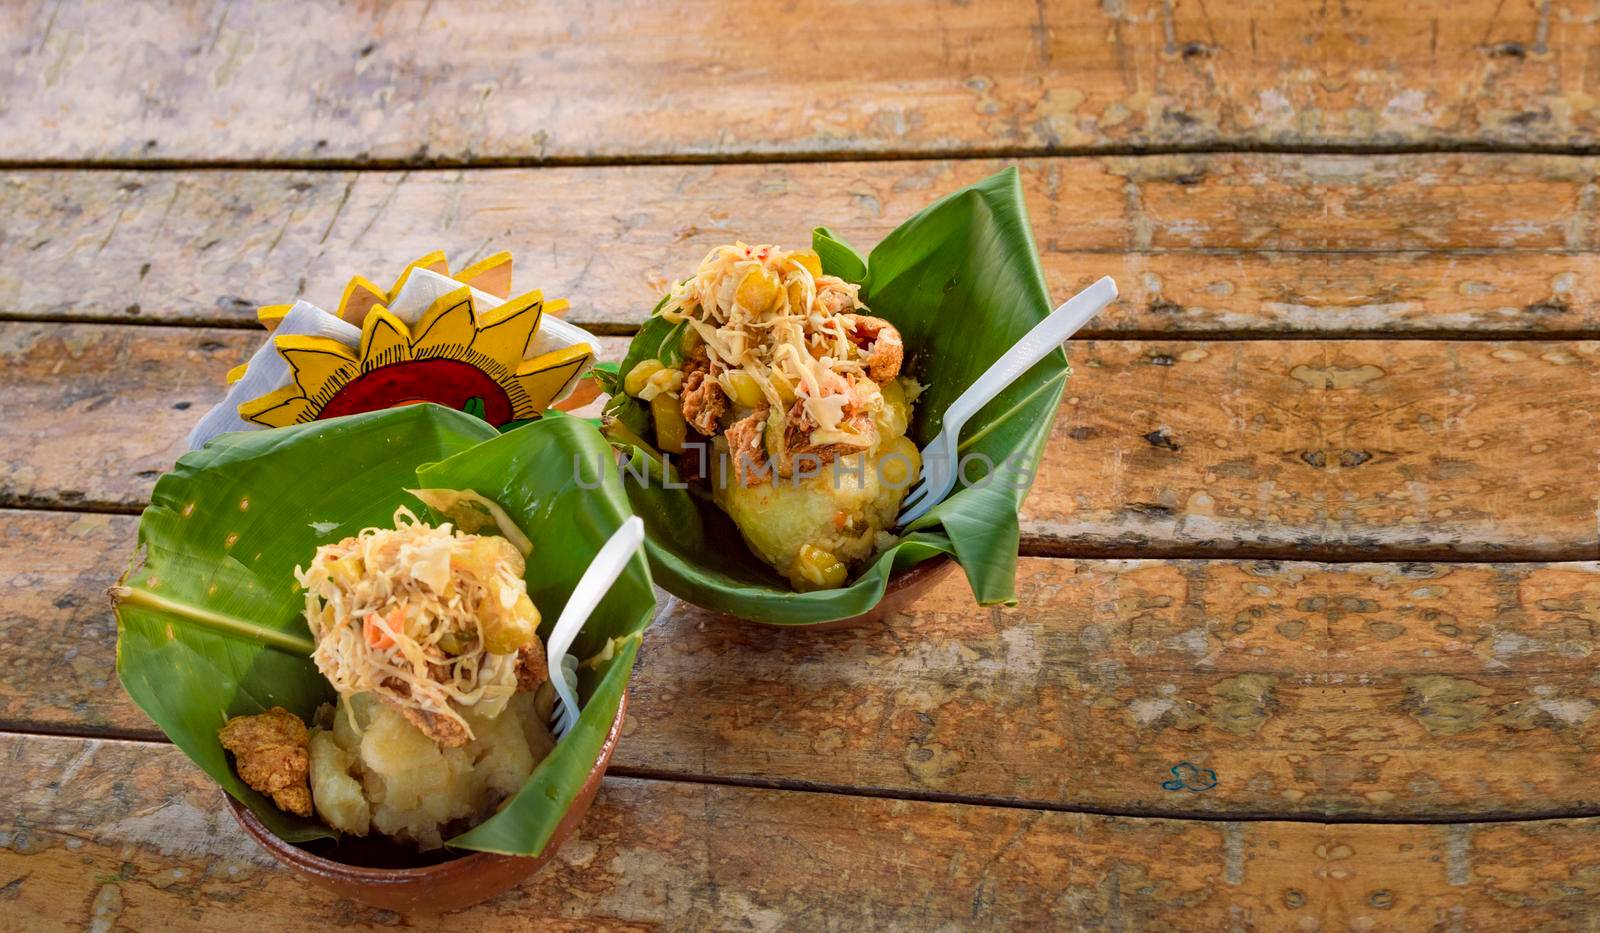 Vigorón with leaves served on a wooden table, two vigorones served on wooden background, vigorón typical food from nicaragua